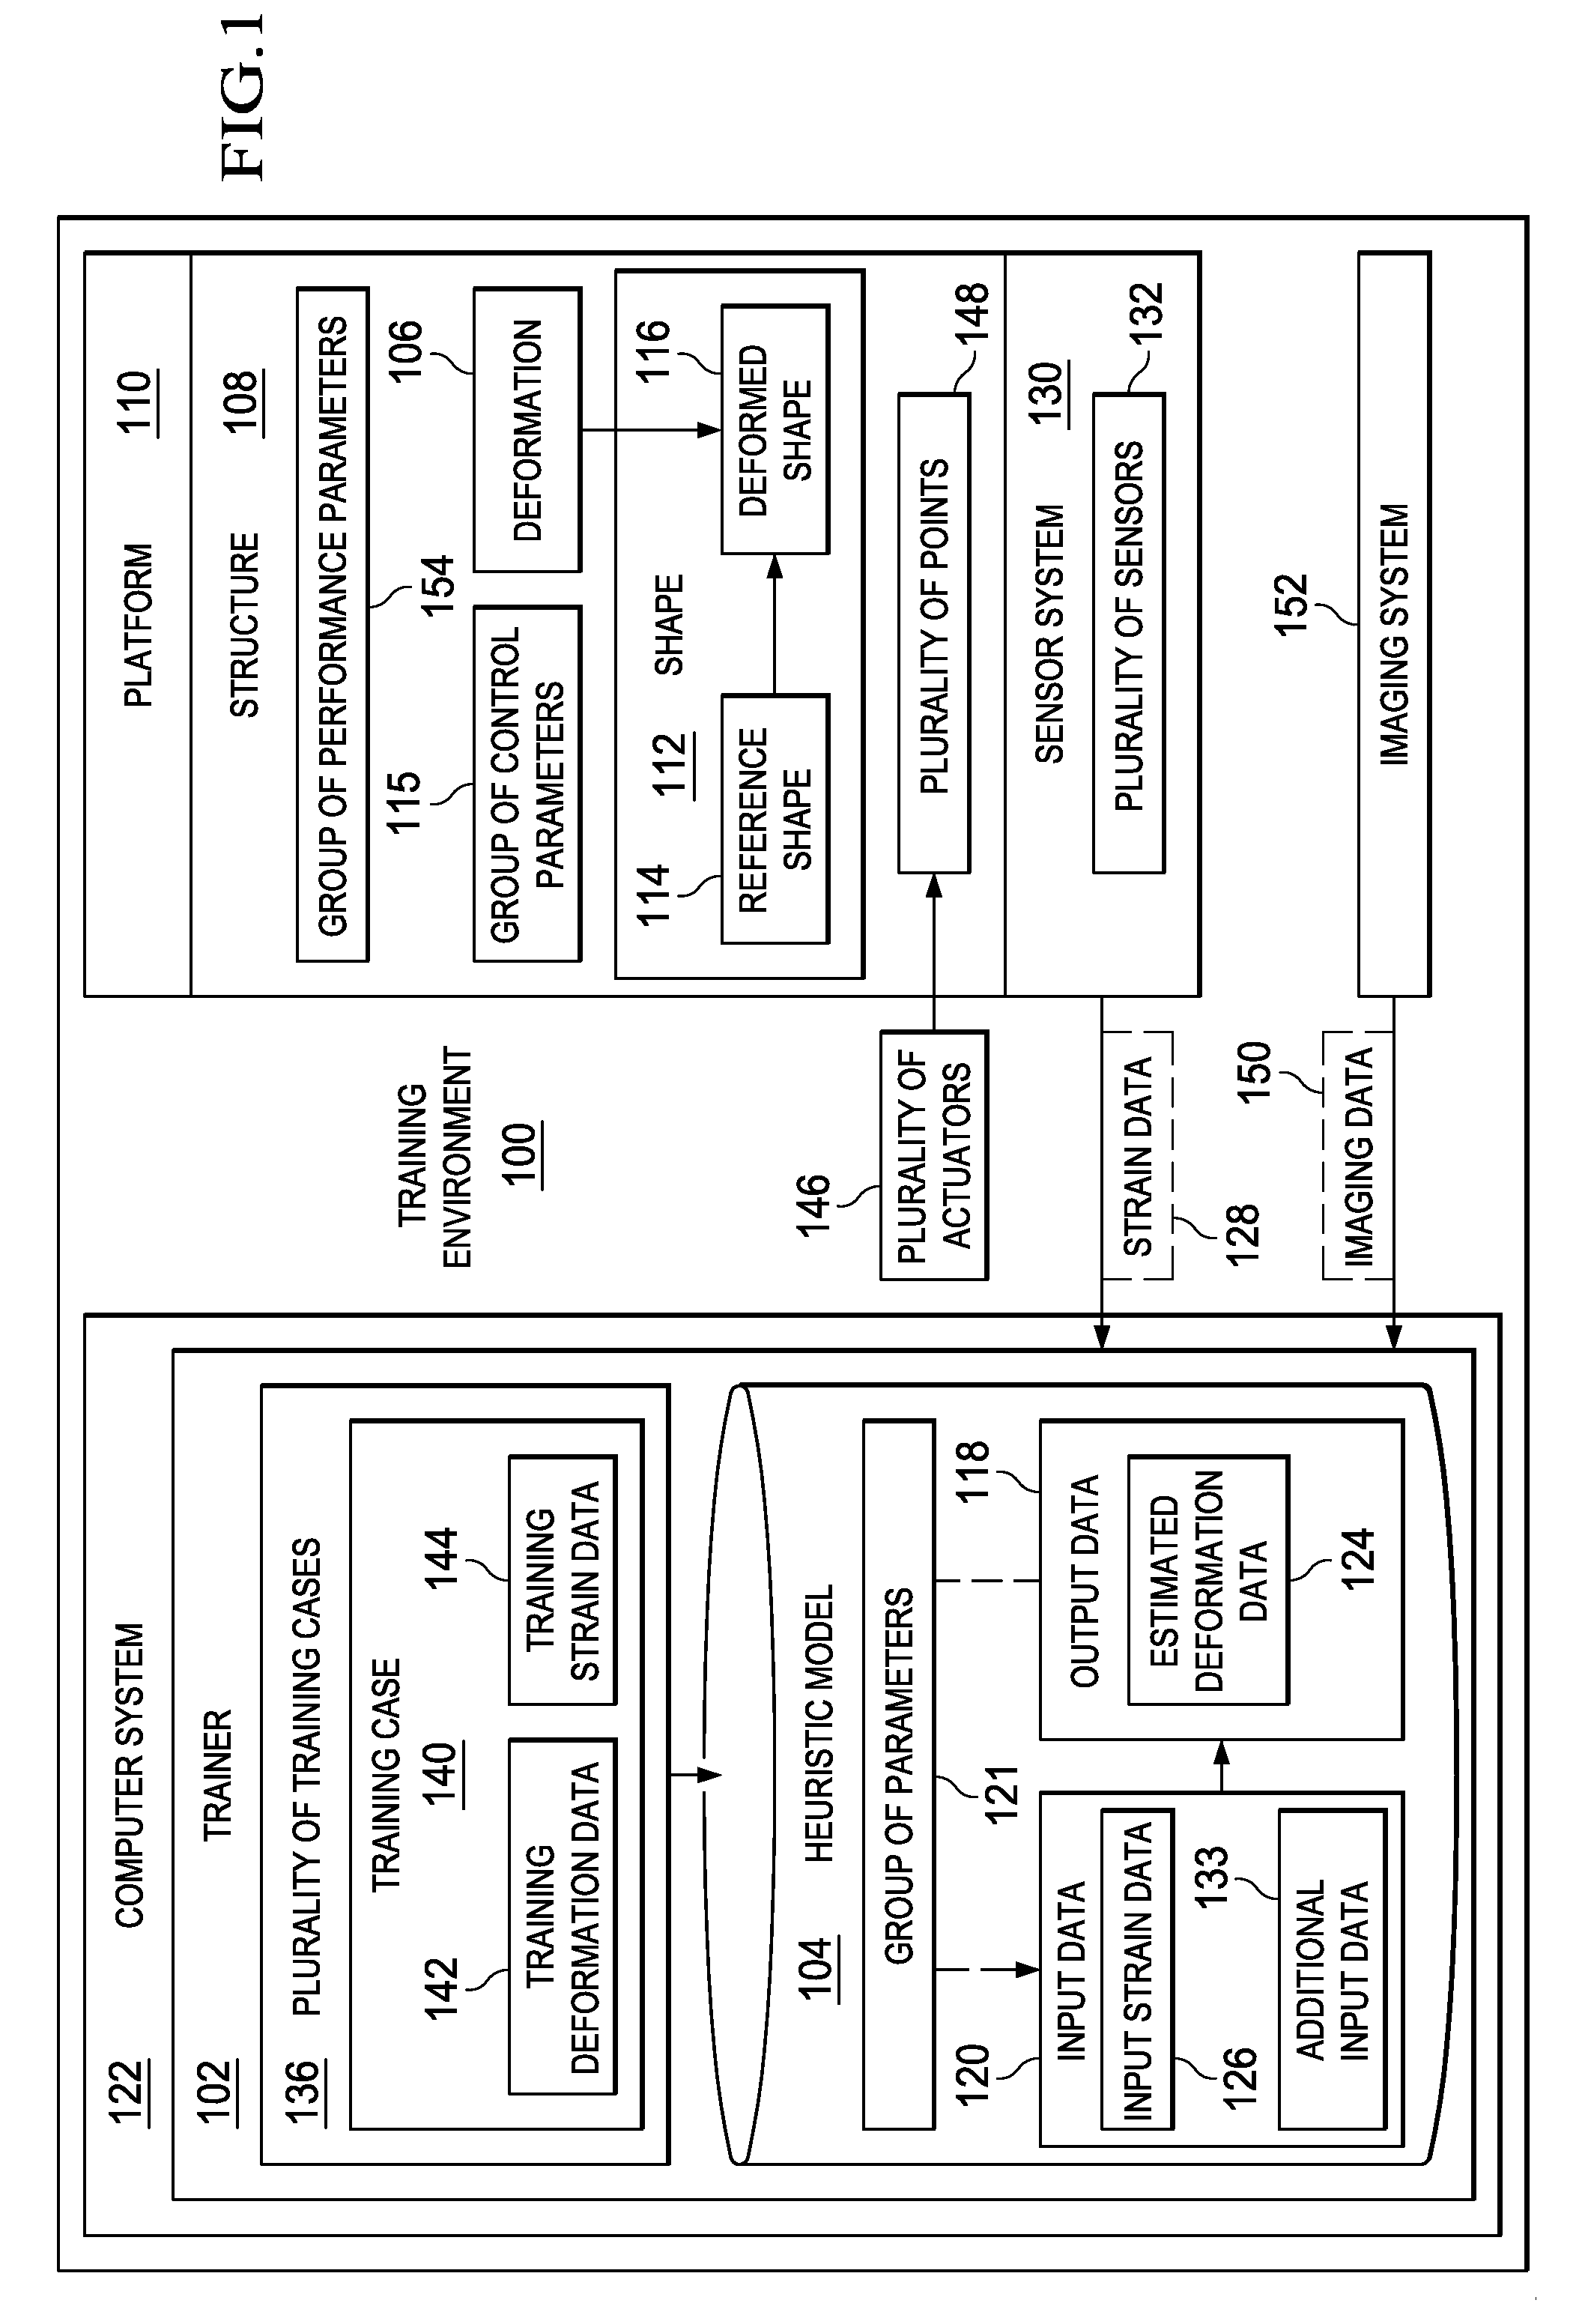 Method and Apparatus for Identifying Structural Deformation